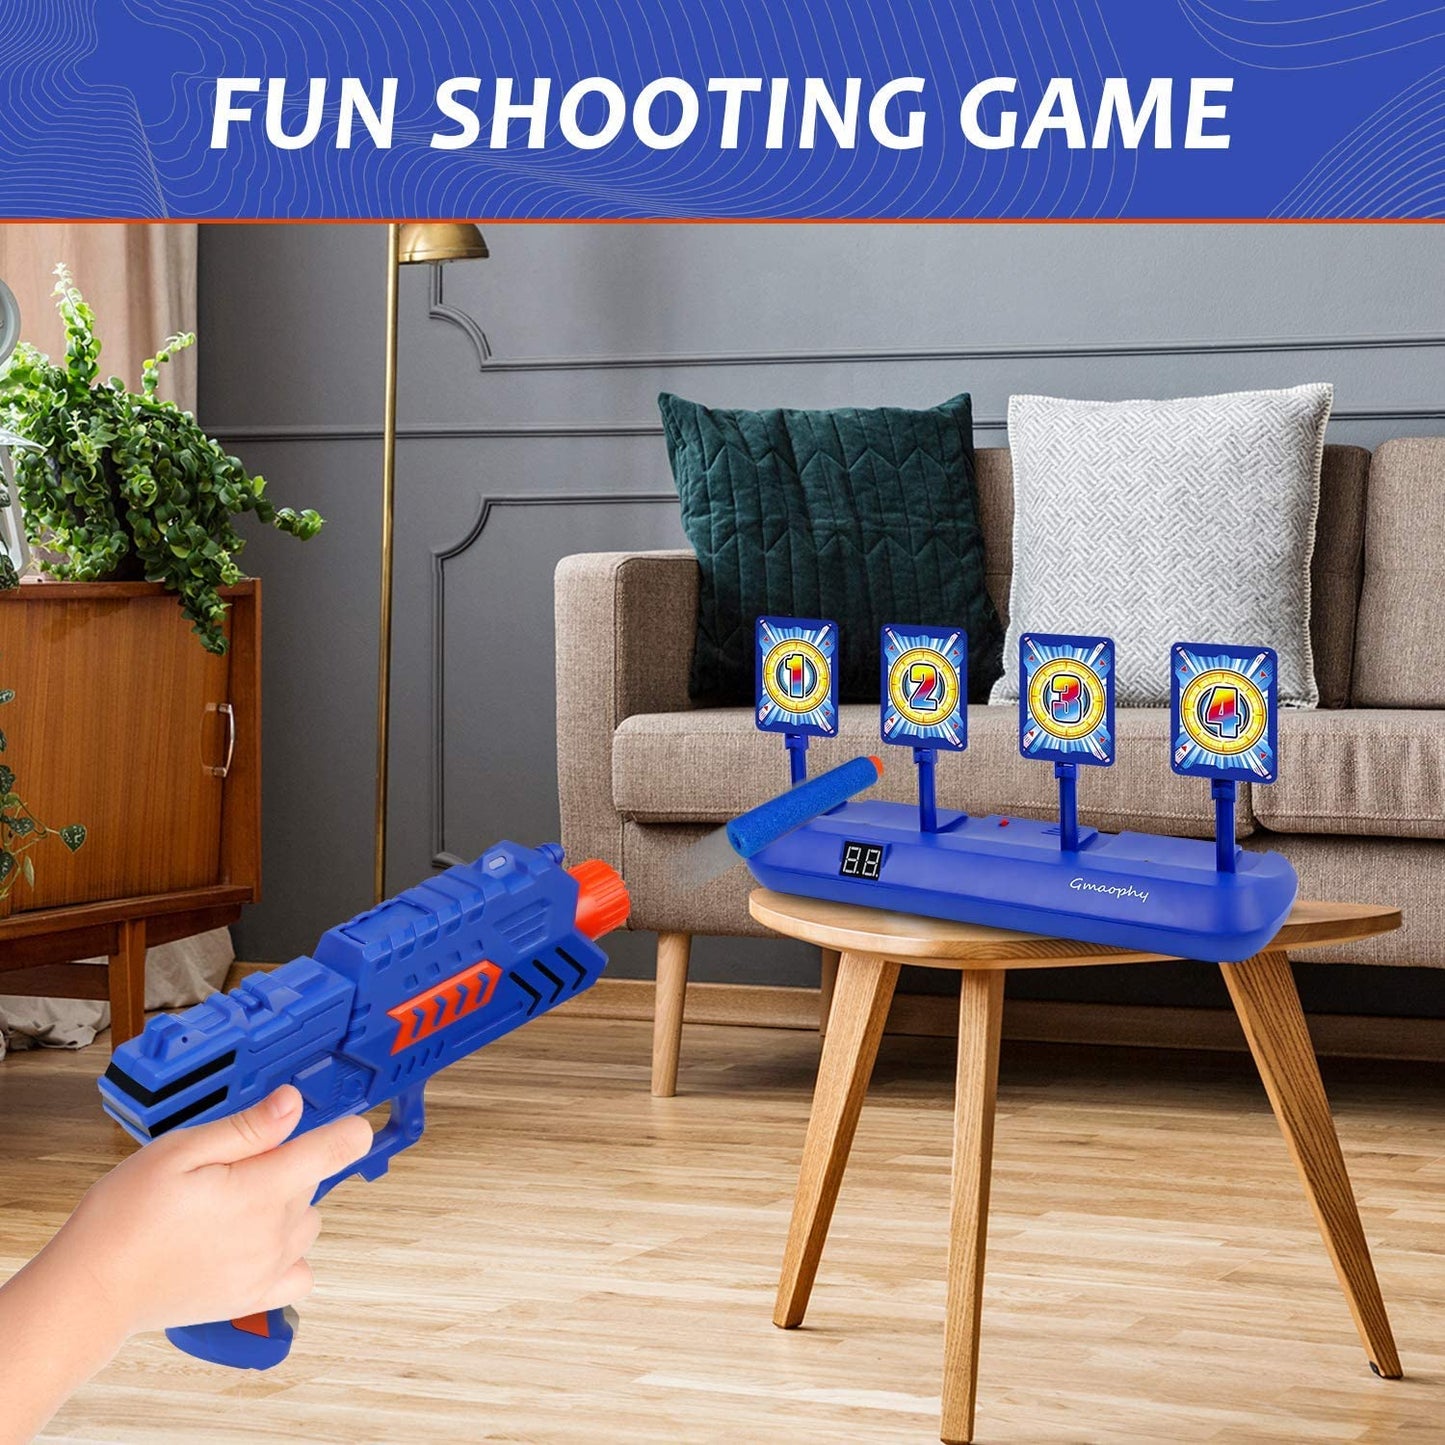 Digital Shooting Targets with Foam Dart Toy Shooting Blaster , 4 Targets Auto Reset Electronic Scoring Toys, Shooting Toys for Age of 5 6 7 8 9 10+ Years Old Kid Boys Girls